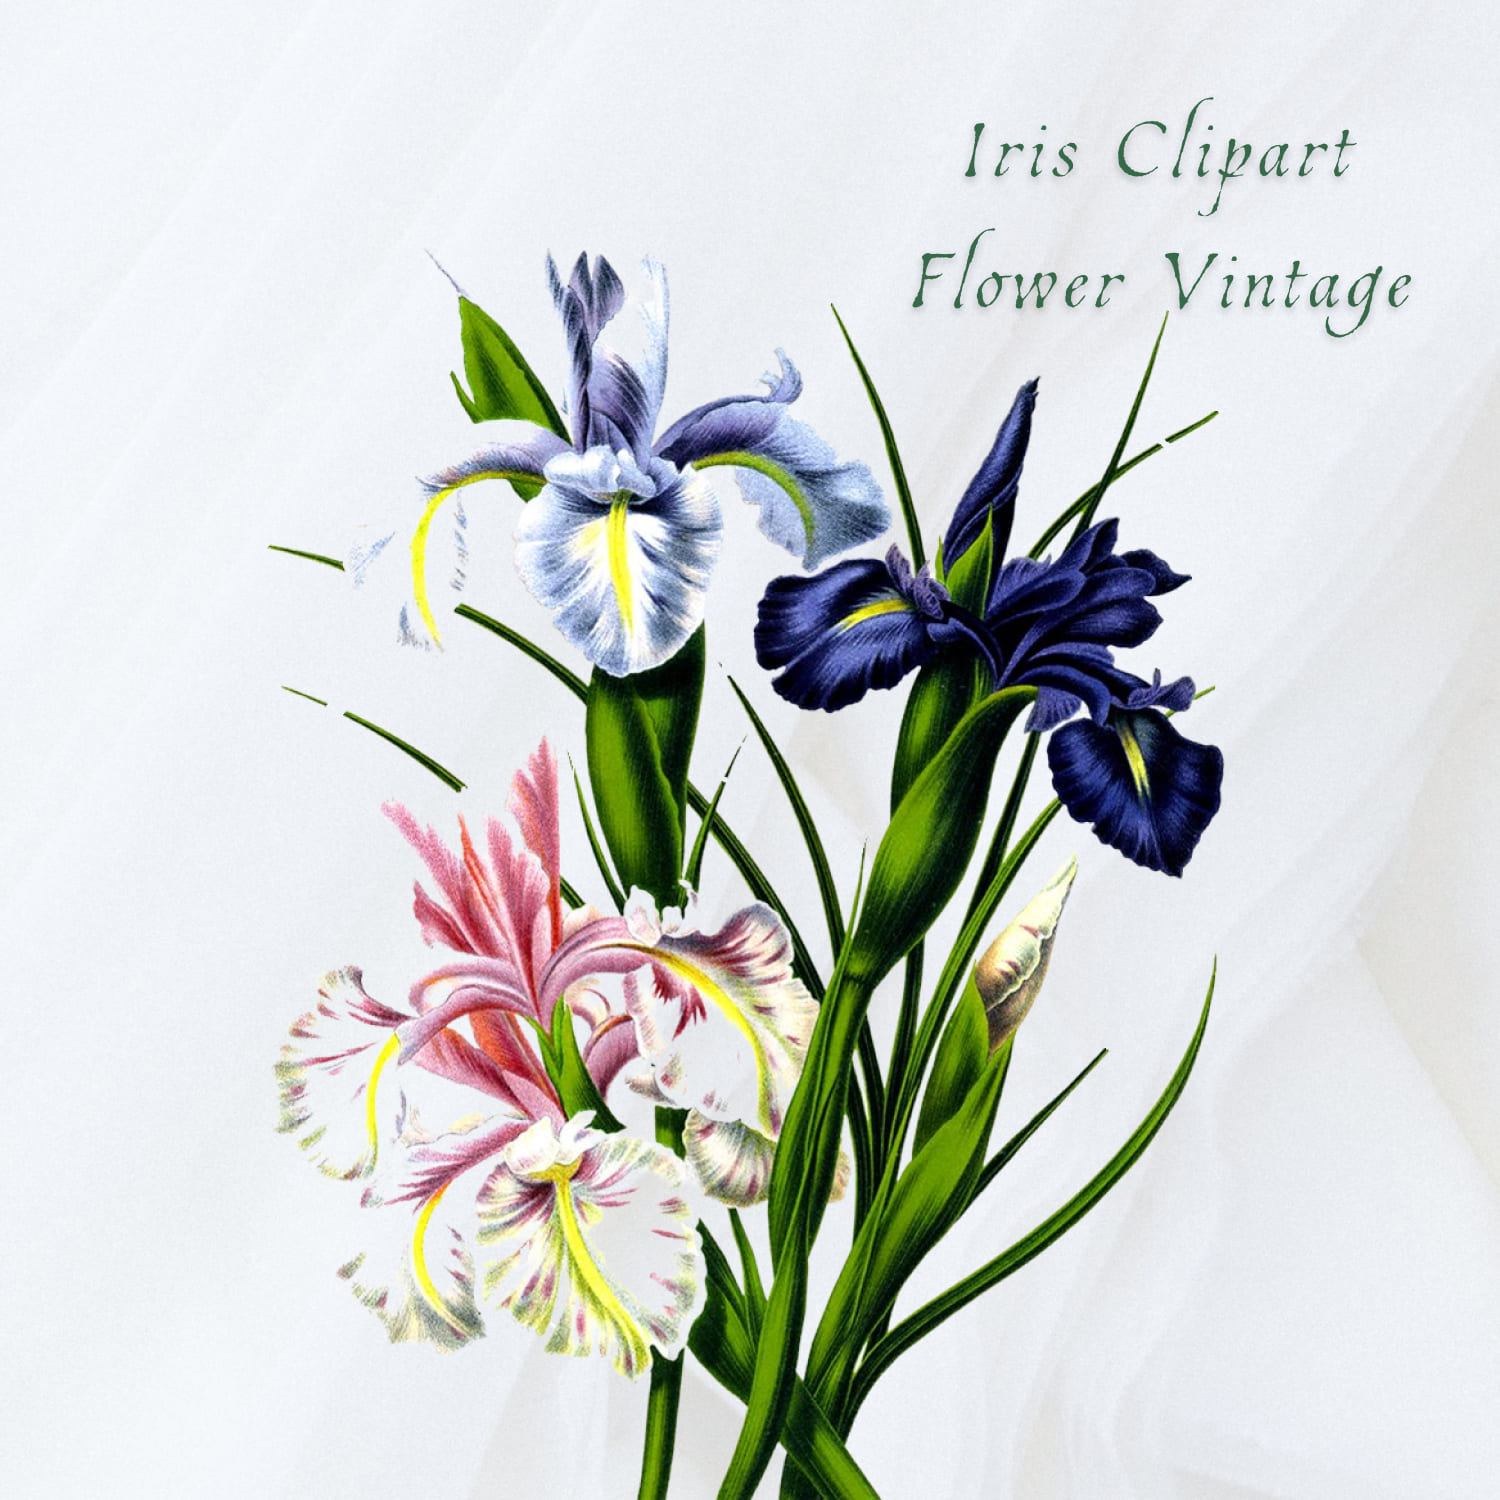 English Iris Clipart Flower Vintage cover image.